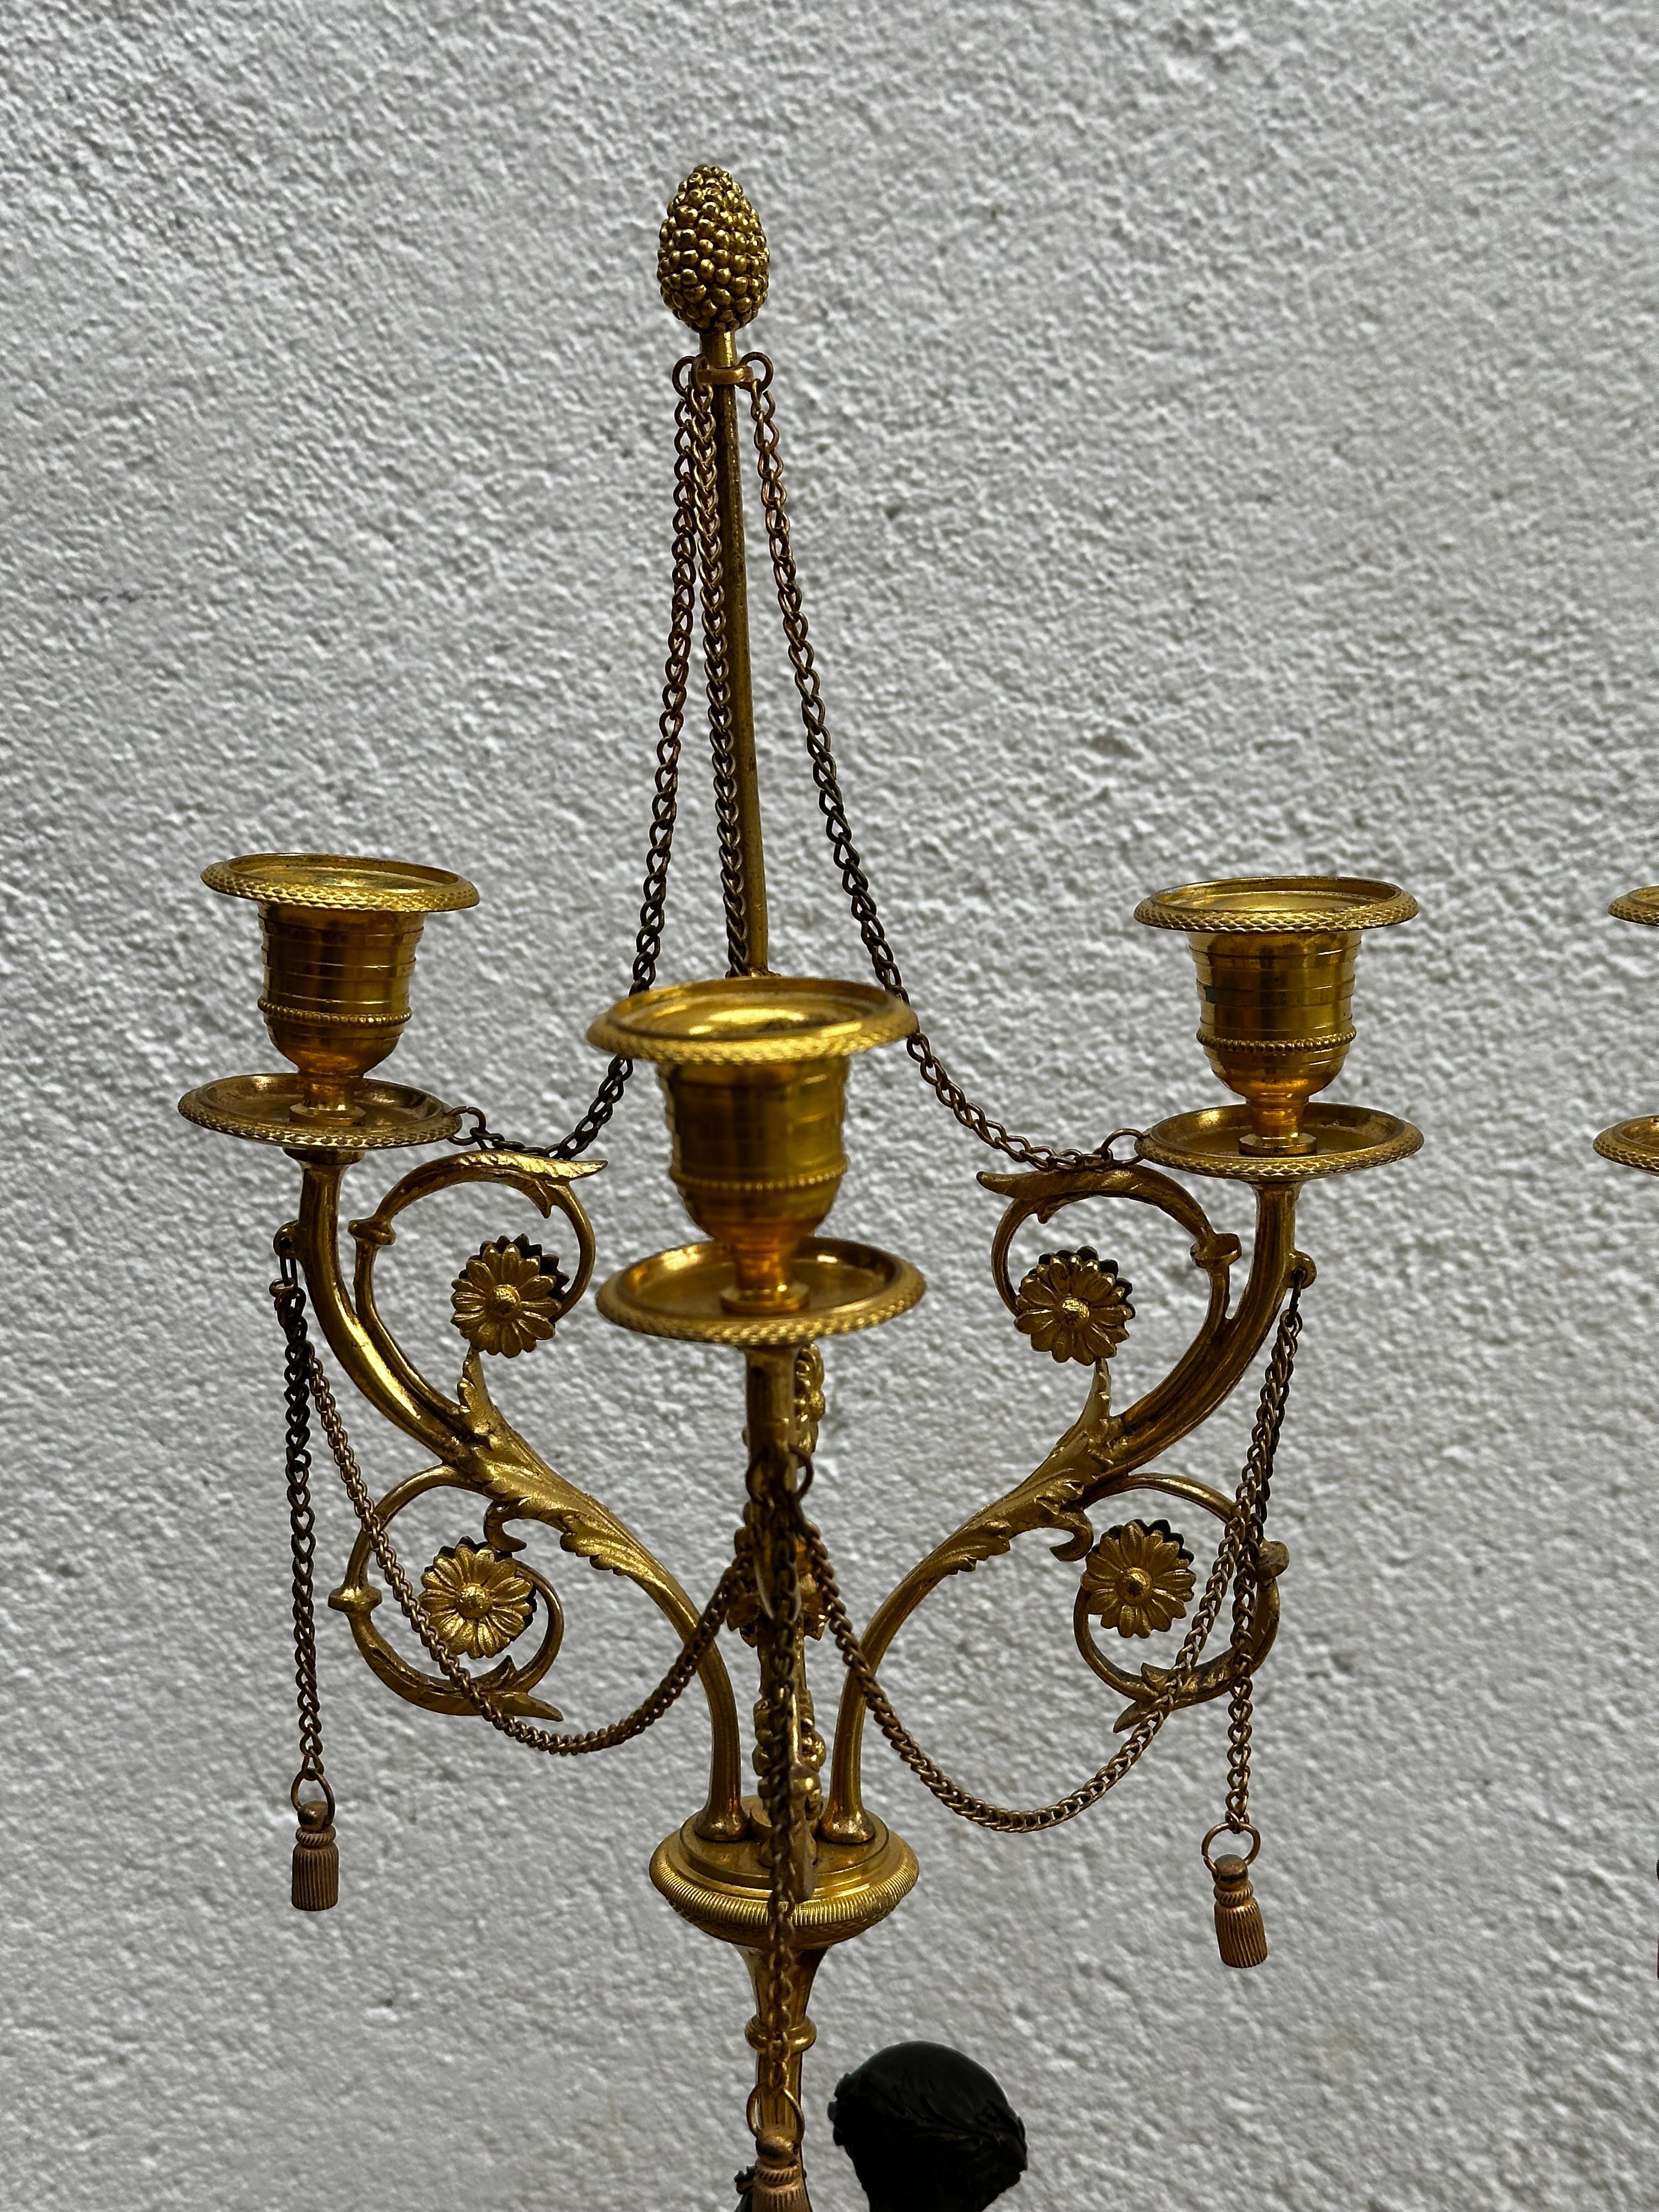 A pair of Candelabras, made in France about 1780. 
Lois XVI, gilded and patinated bronze with white Carrera marble.

